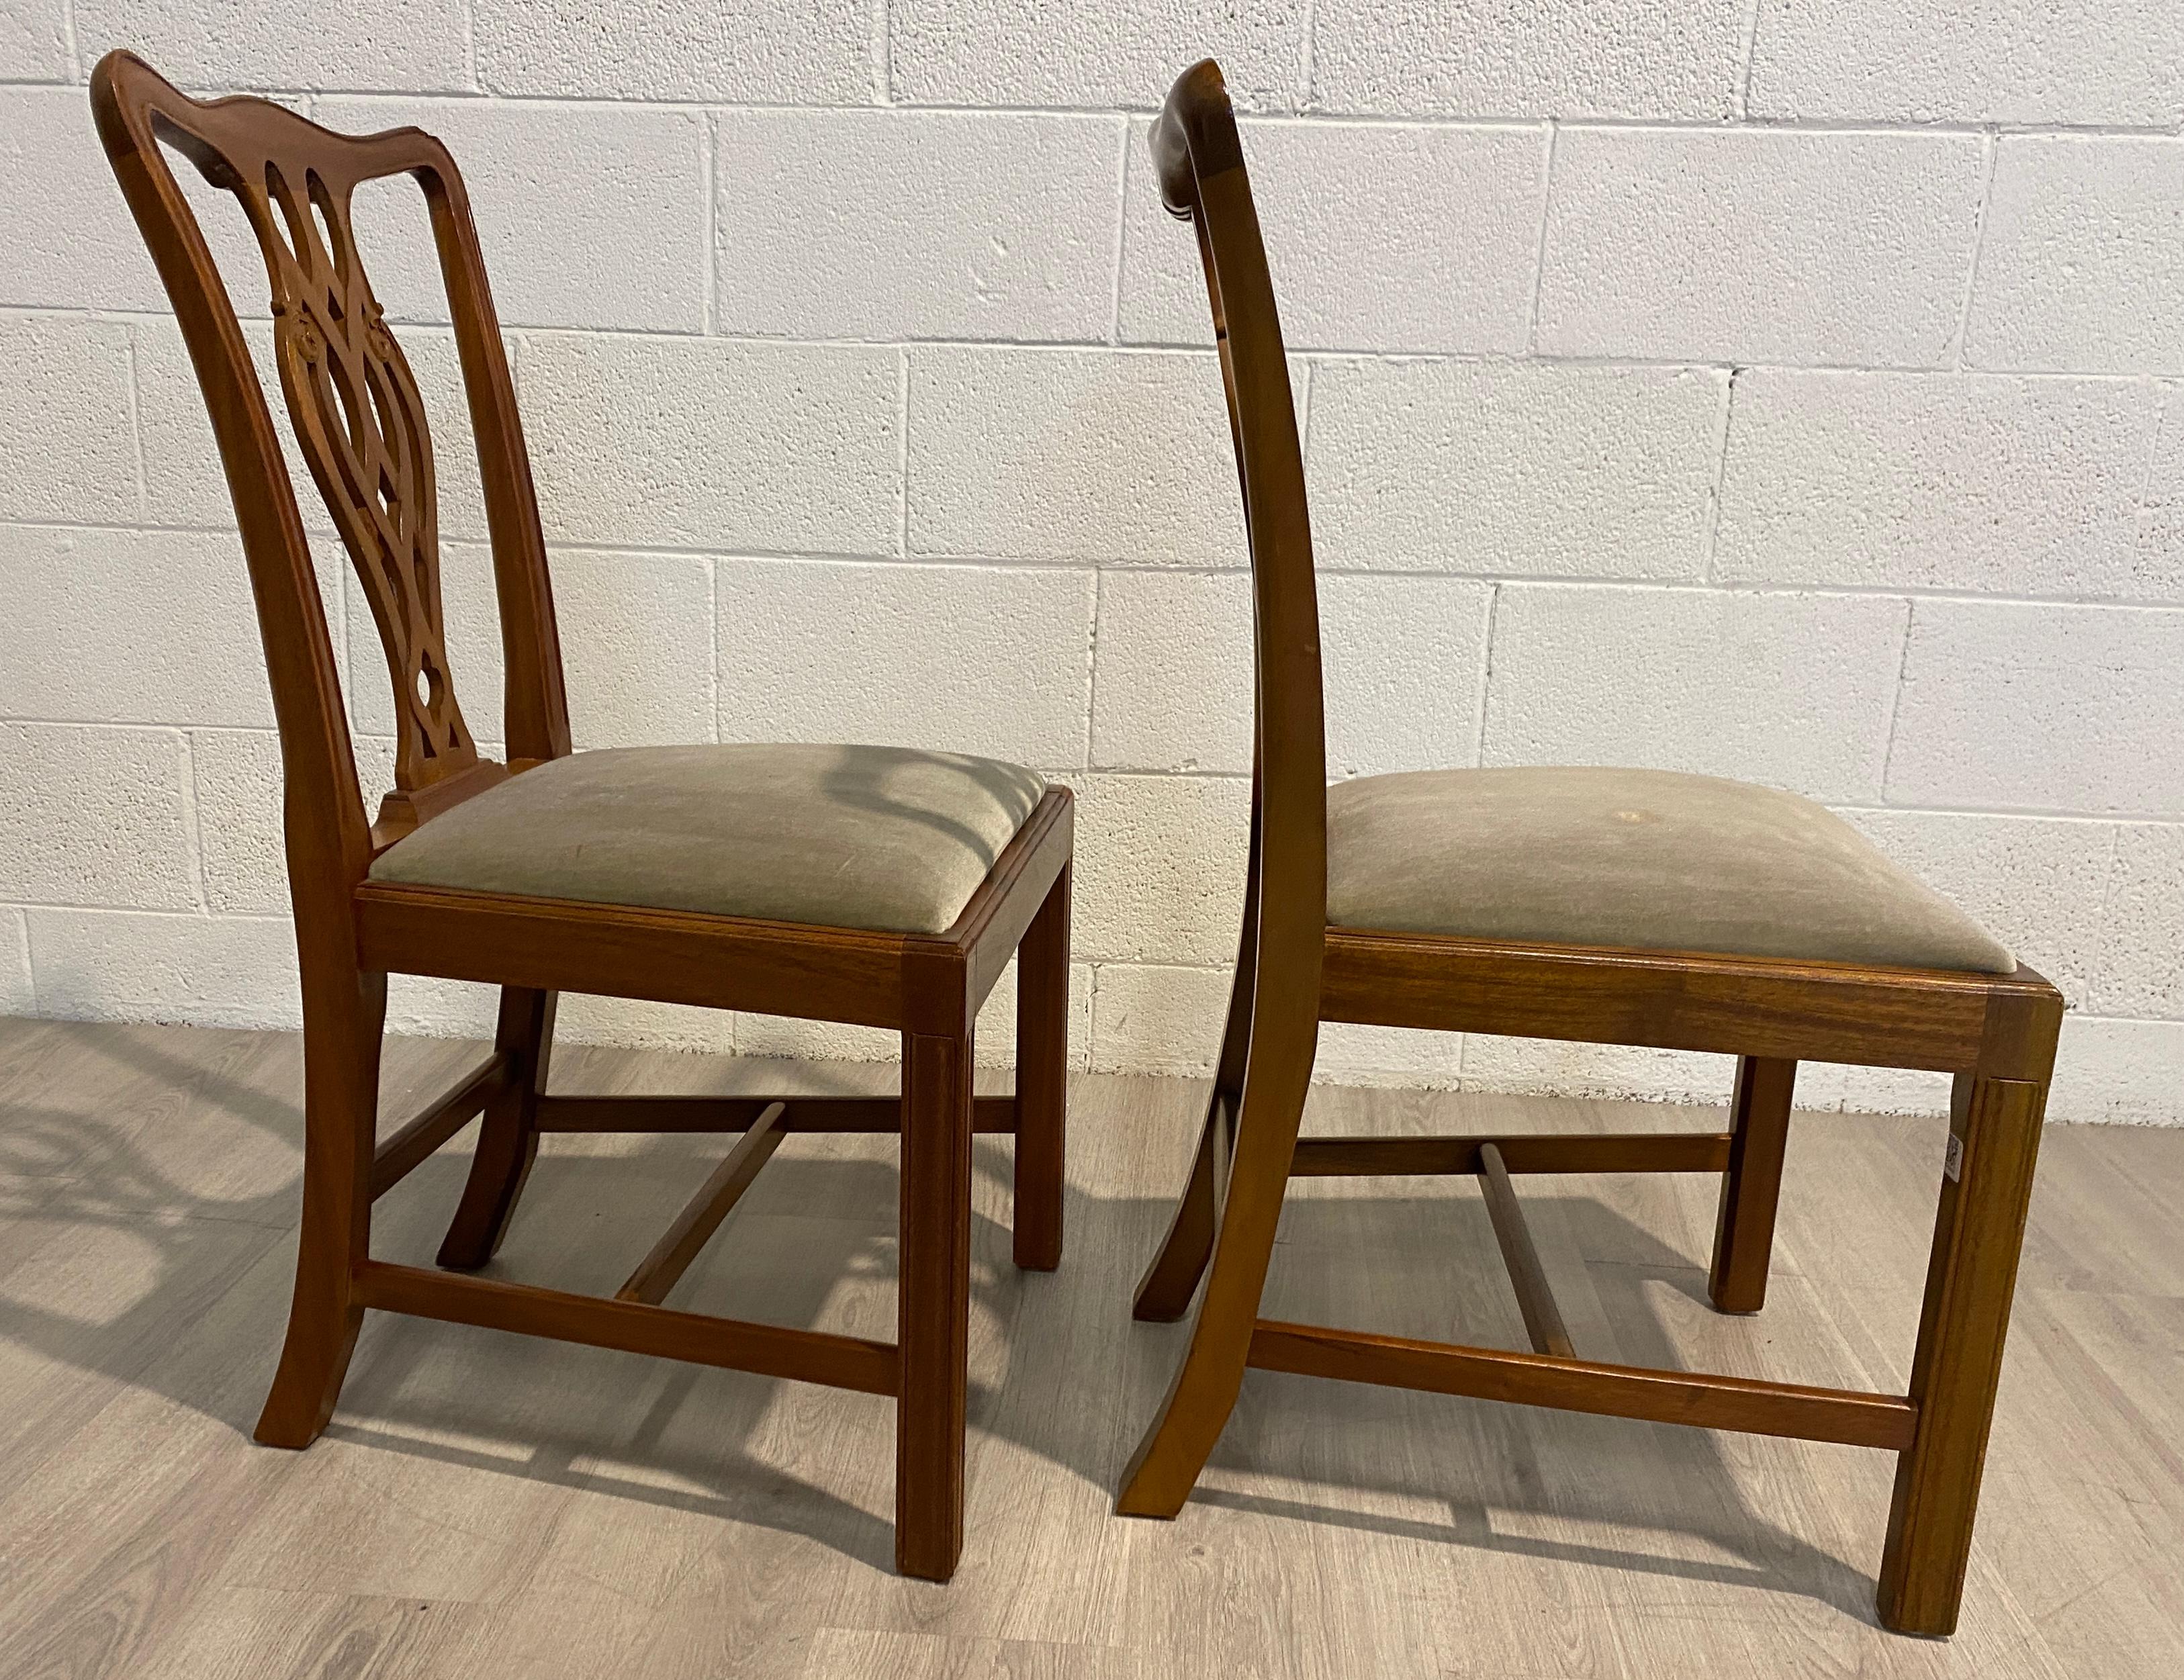 20th Century Dining Chairs, Mahogany, Georgian Style, Made in England, Two Chairs without Arm For Sale